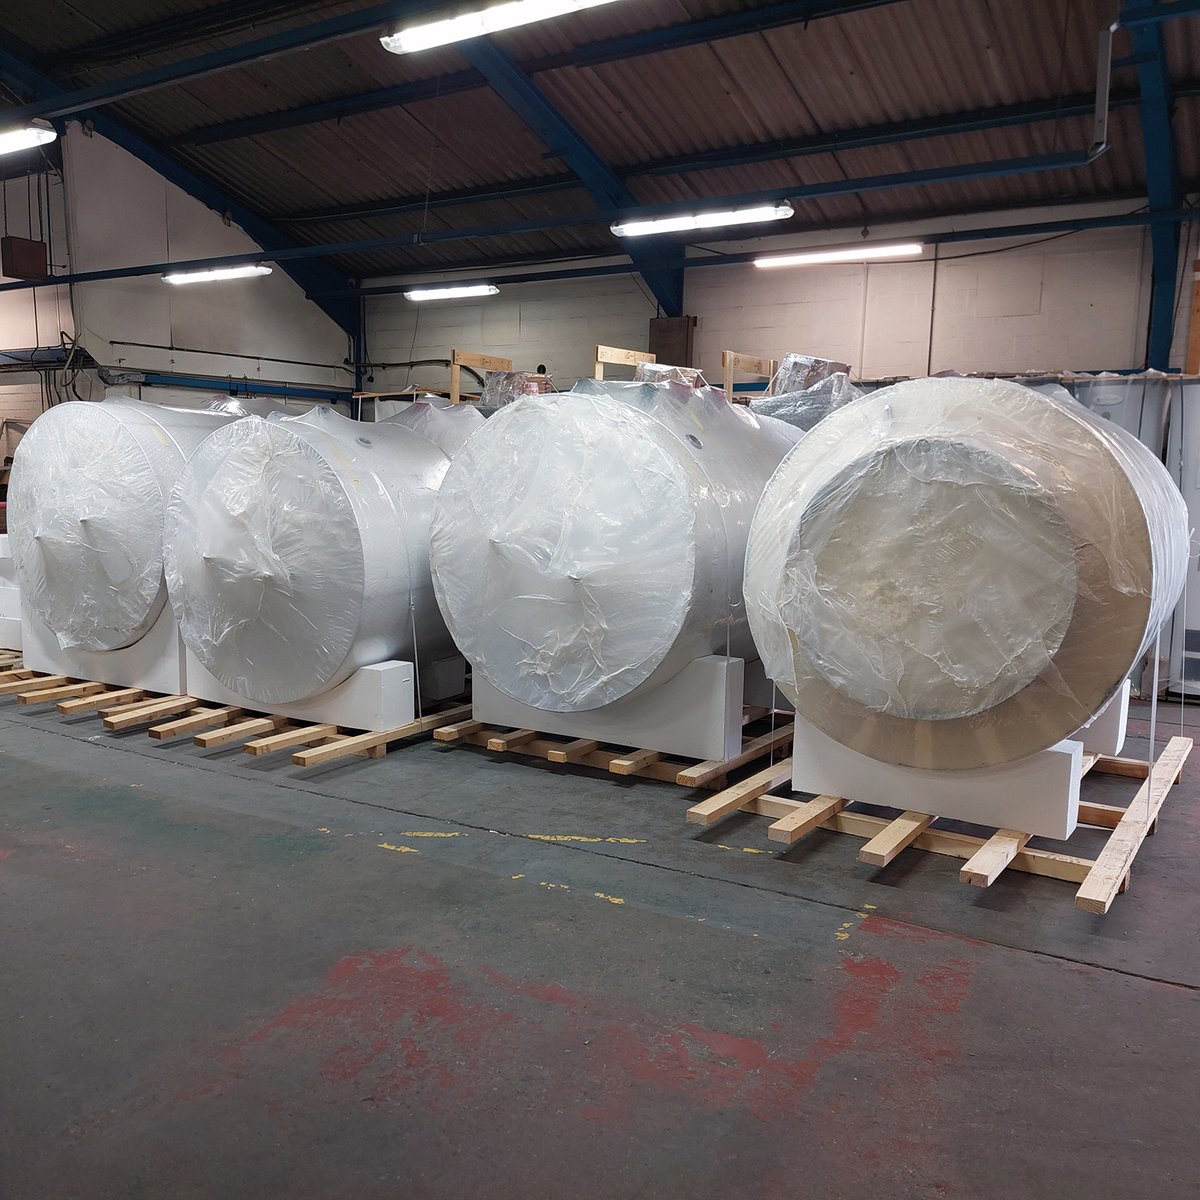 Production line of water heater in the factory!

We offer a standard range of vessels or we can design & build to your specific requirements.

#waterheaterwednesday #waterheaters #waterheating #sustainabledesign #fabdec #industrial #hvac #plumbing #heattransfer #stainlesssteel